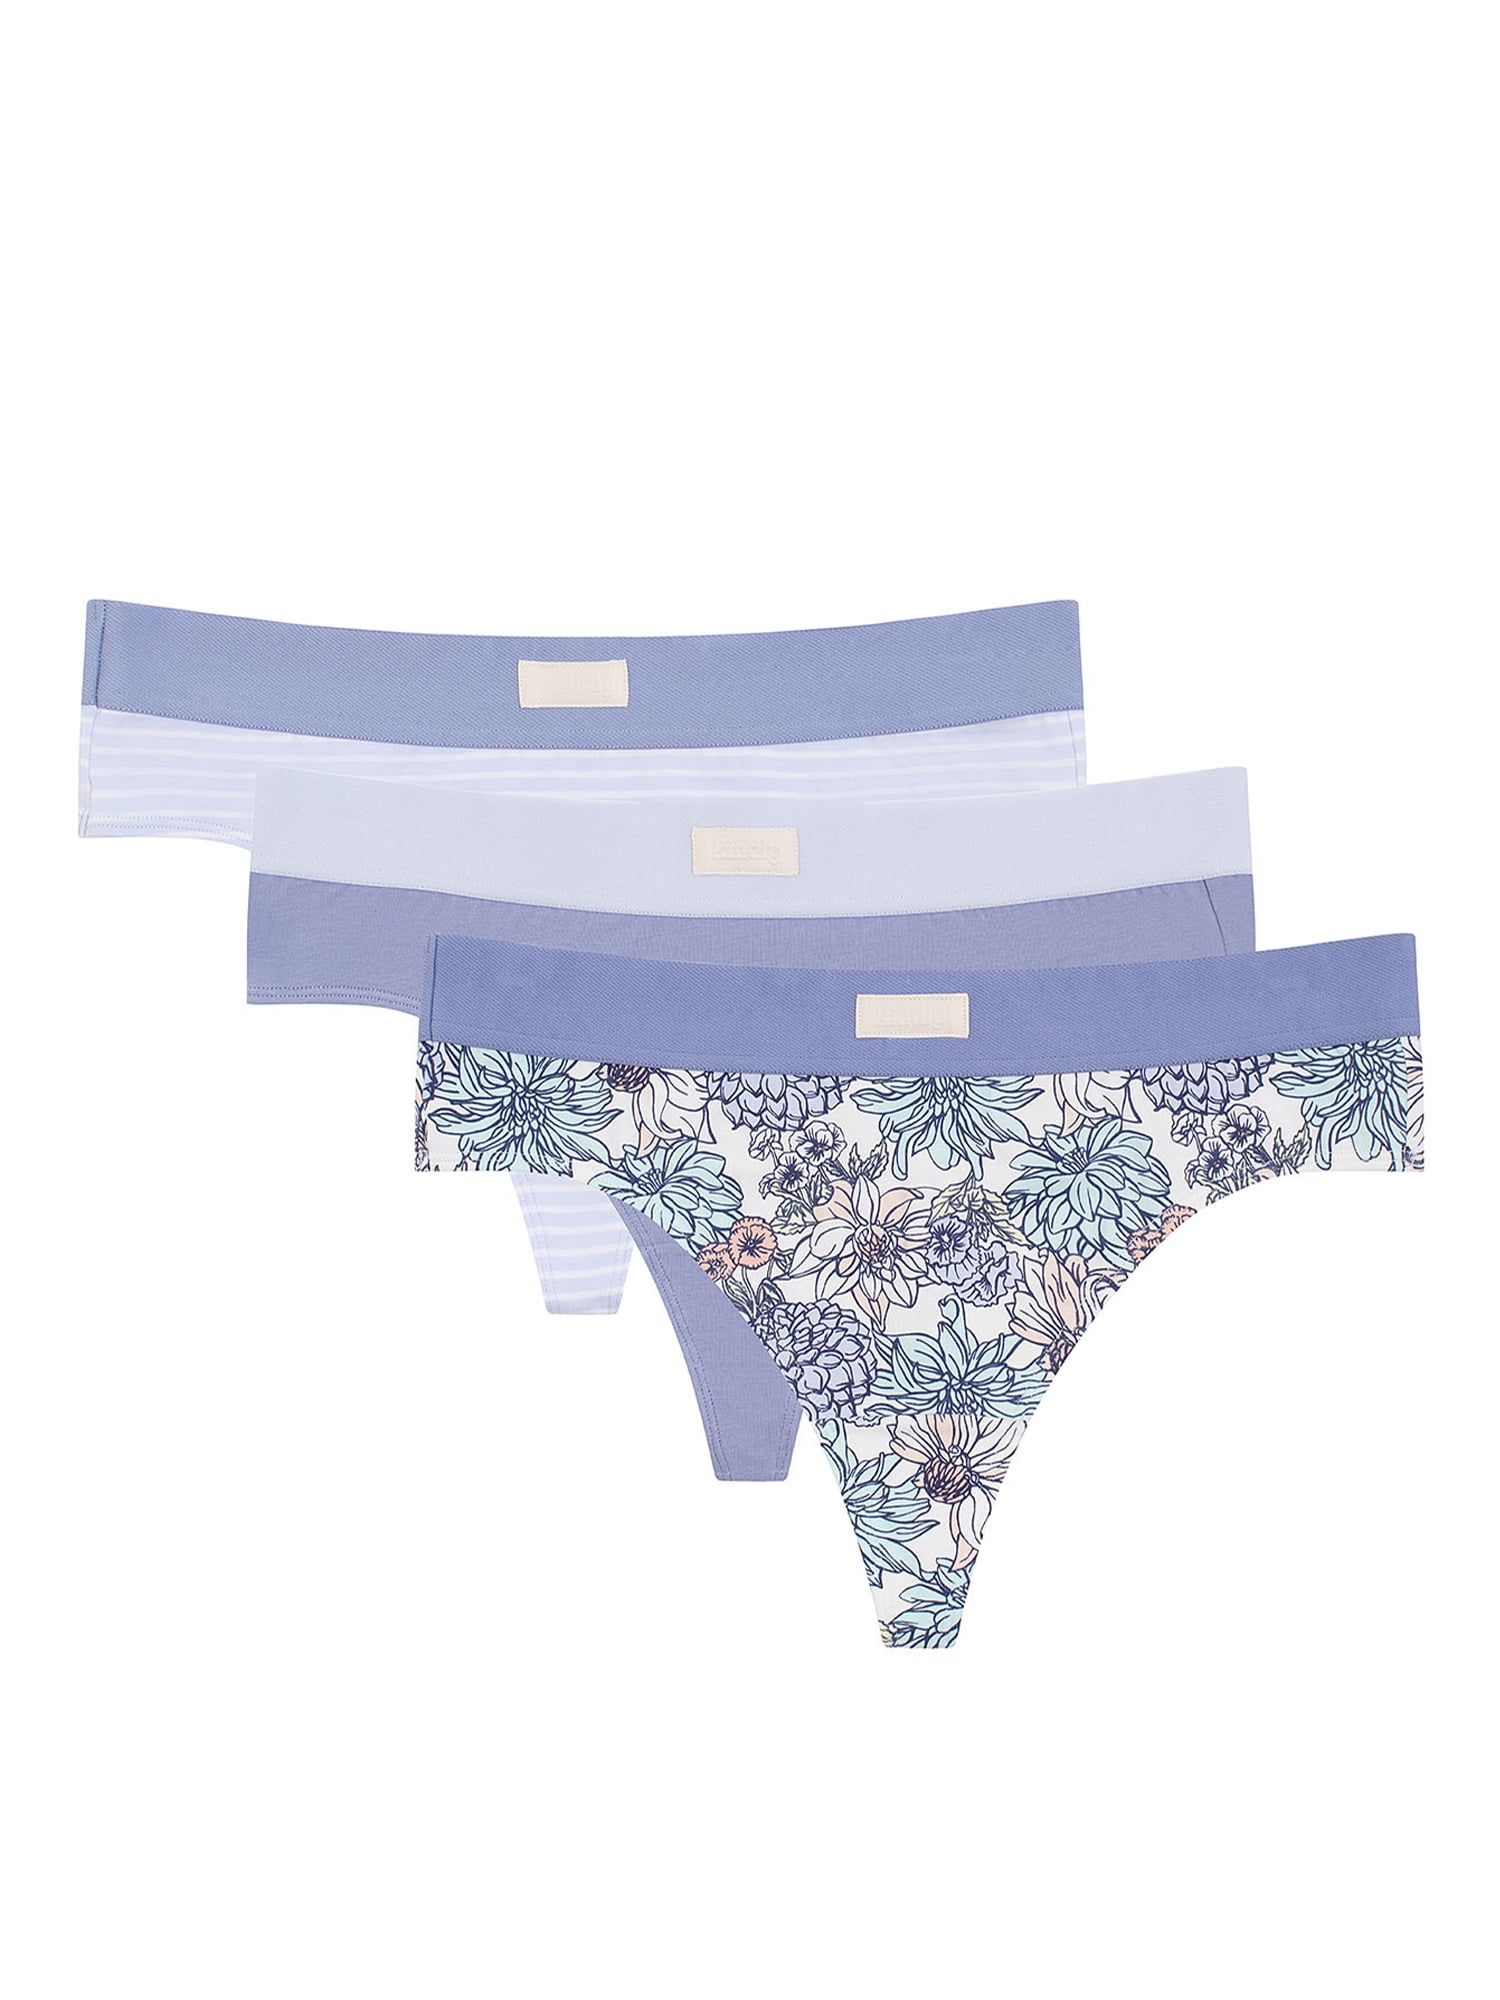 Kindly Yours Women's Sustainable Cotton Thong Underwear, 3-Pack, Sizes XS to  XXXL 